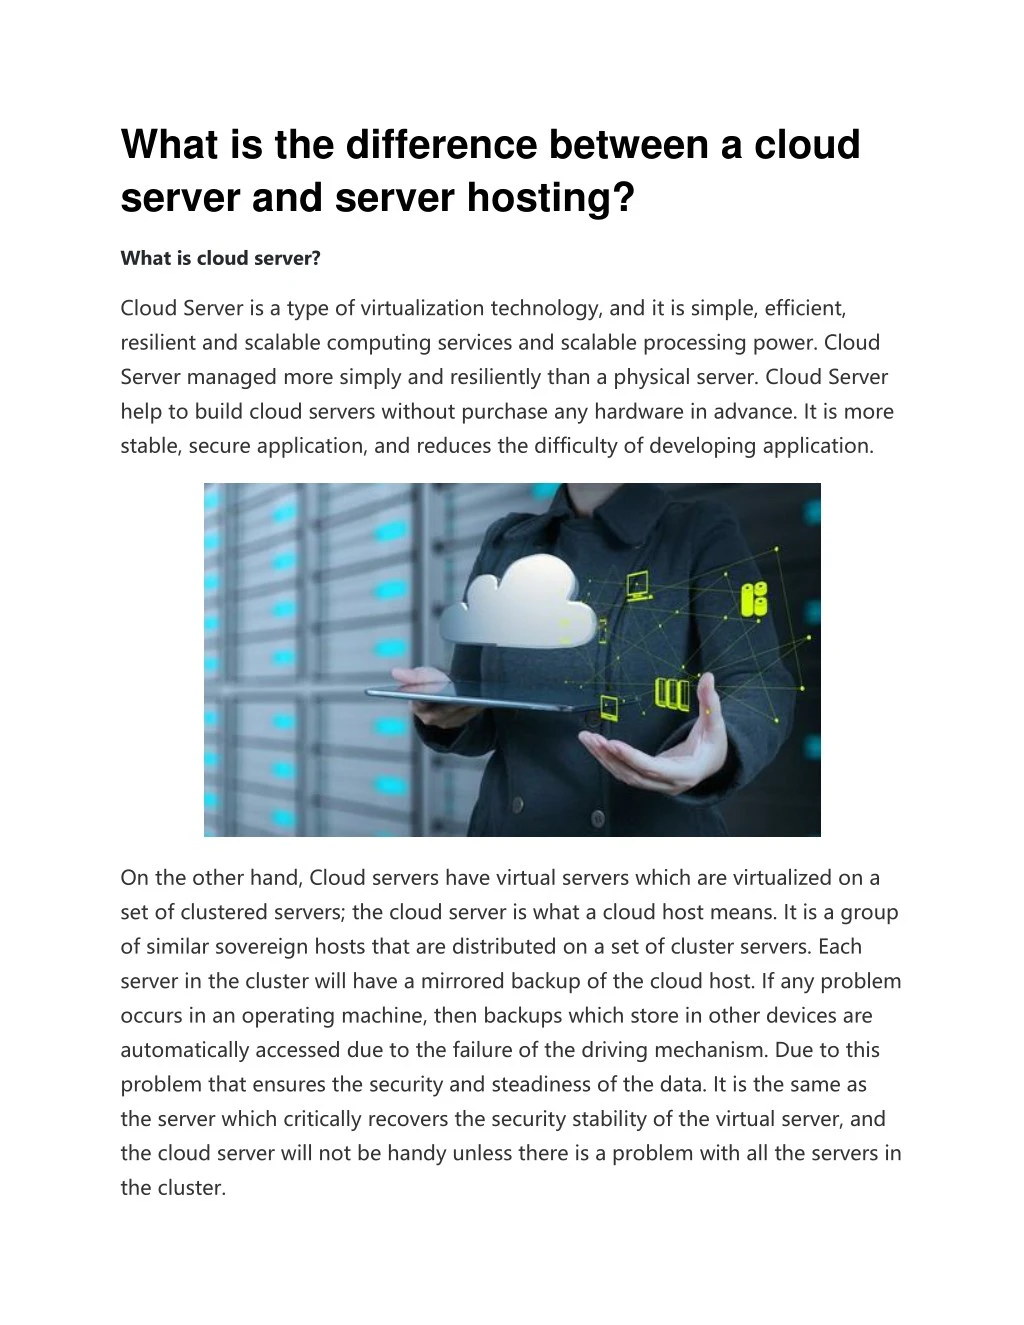 what is the difference between a cloud server